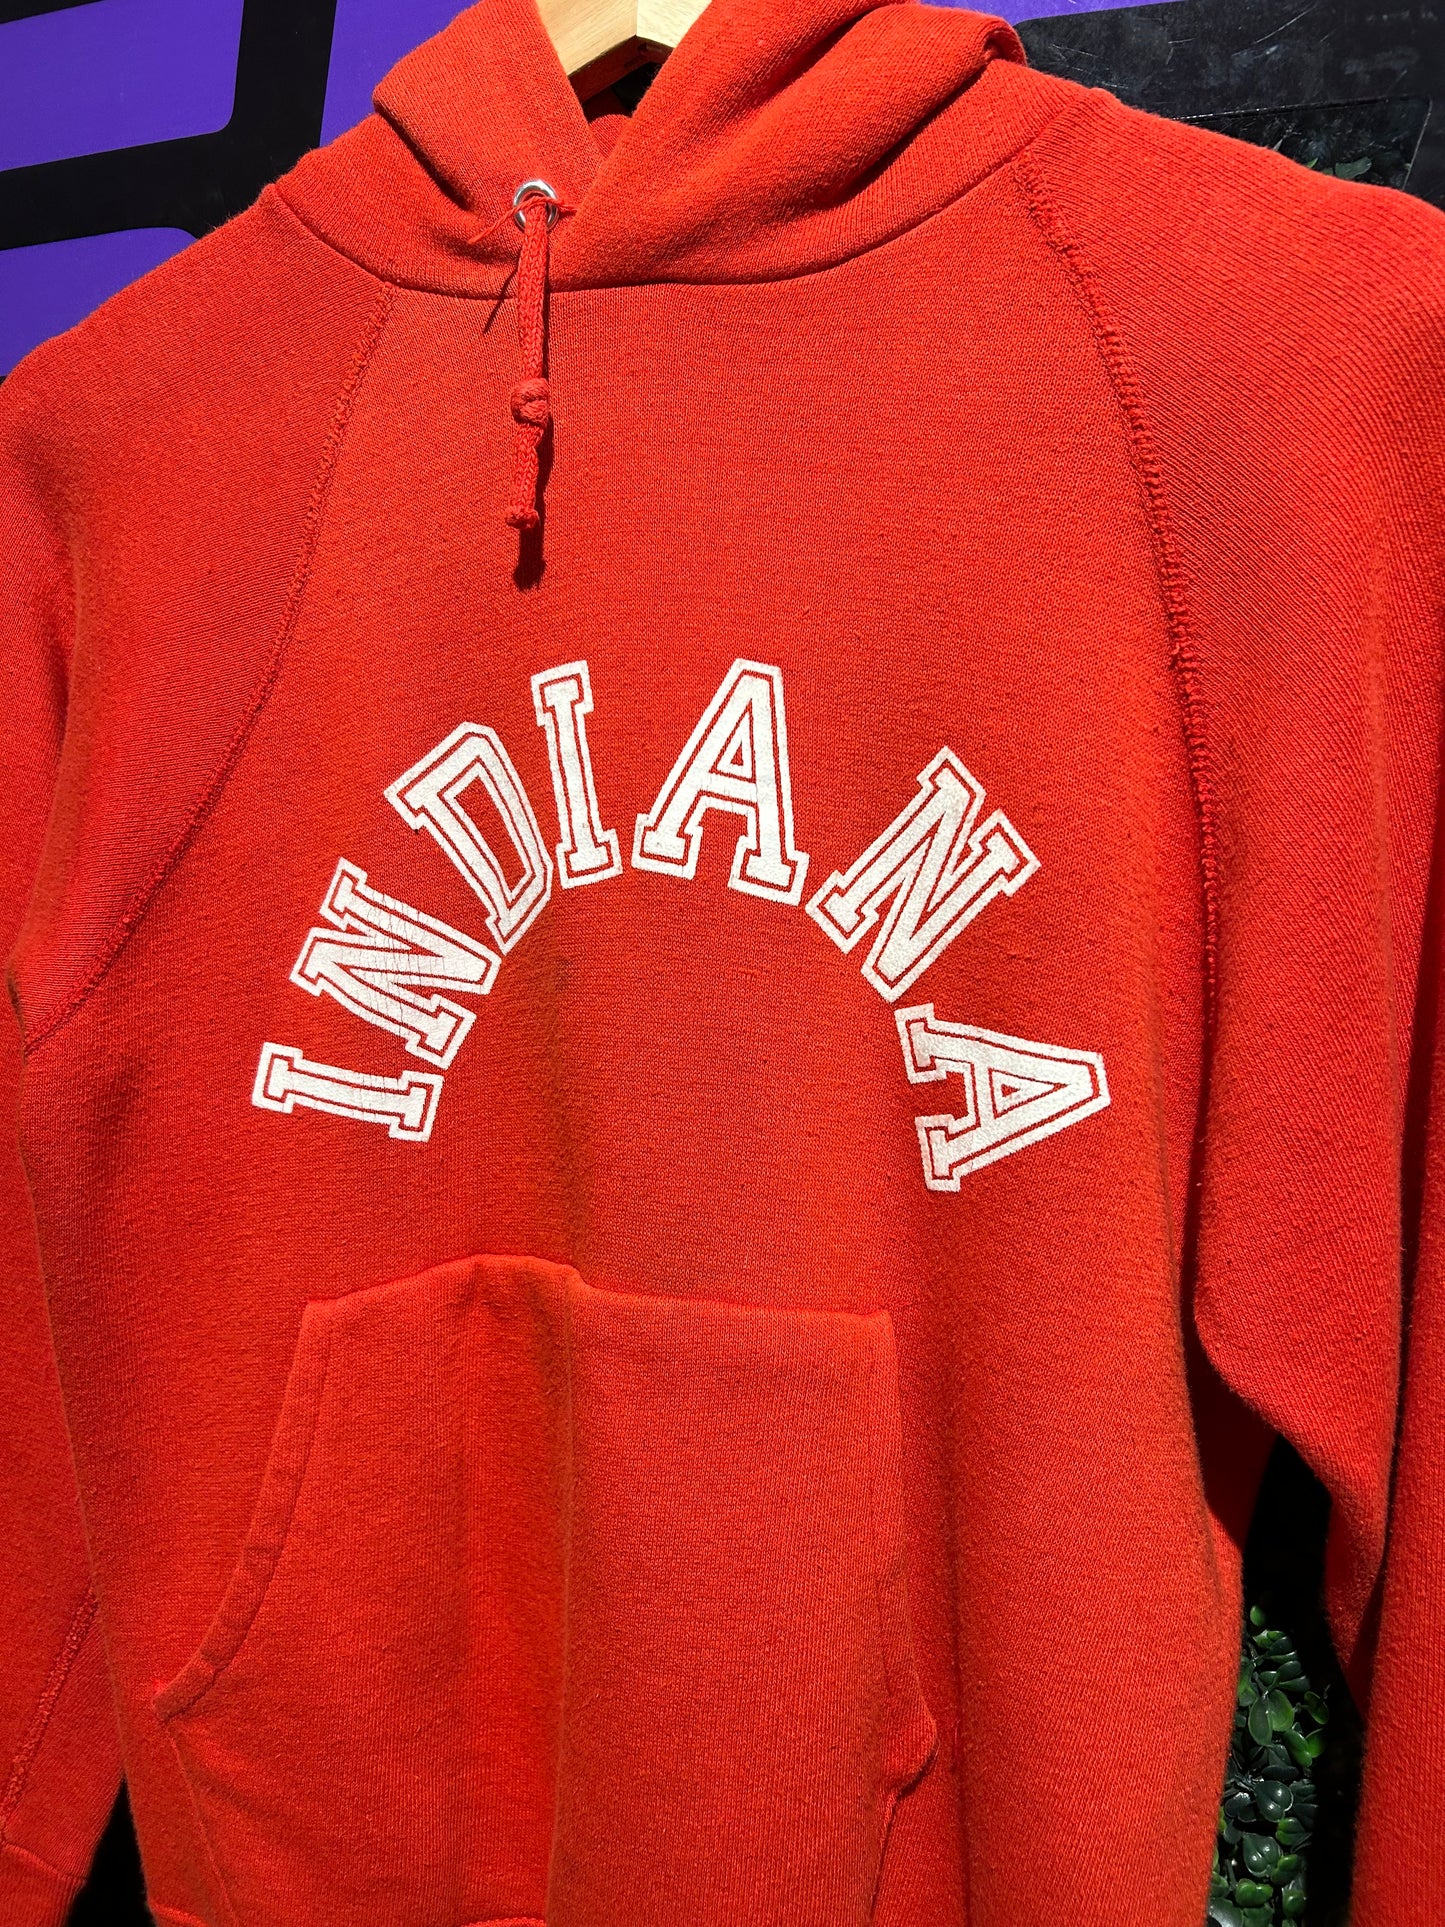 70s Indiana Hoodie. Size X-Small